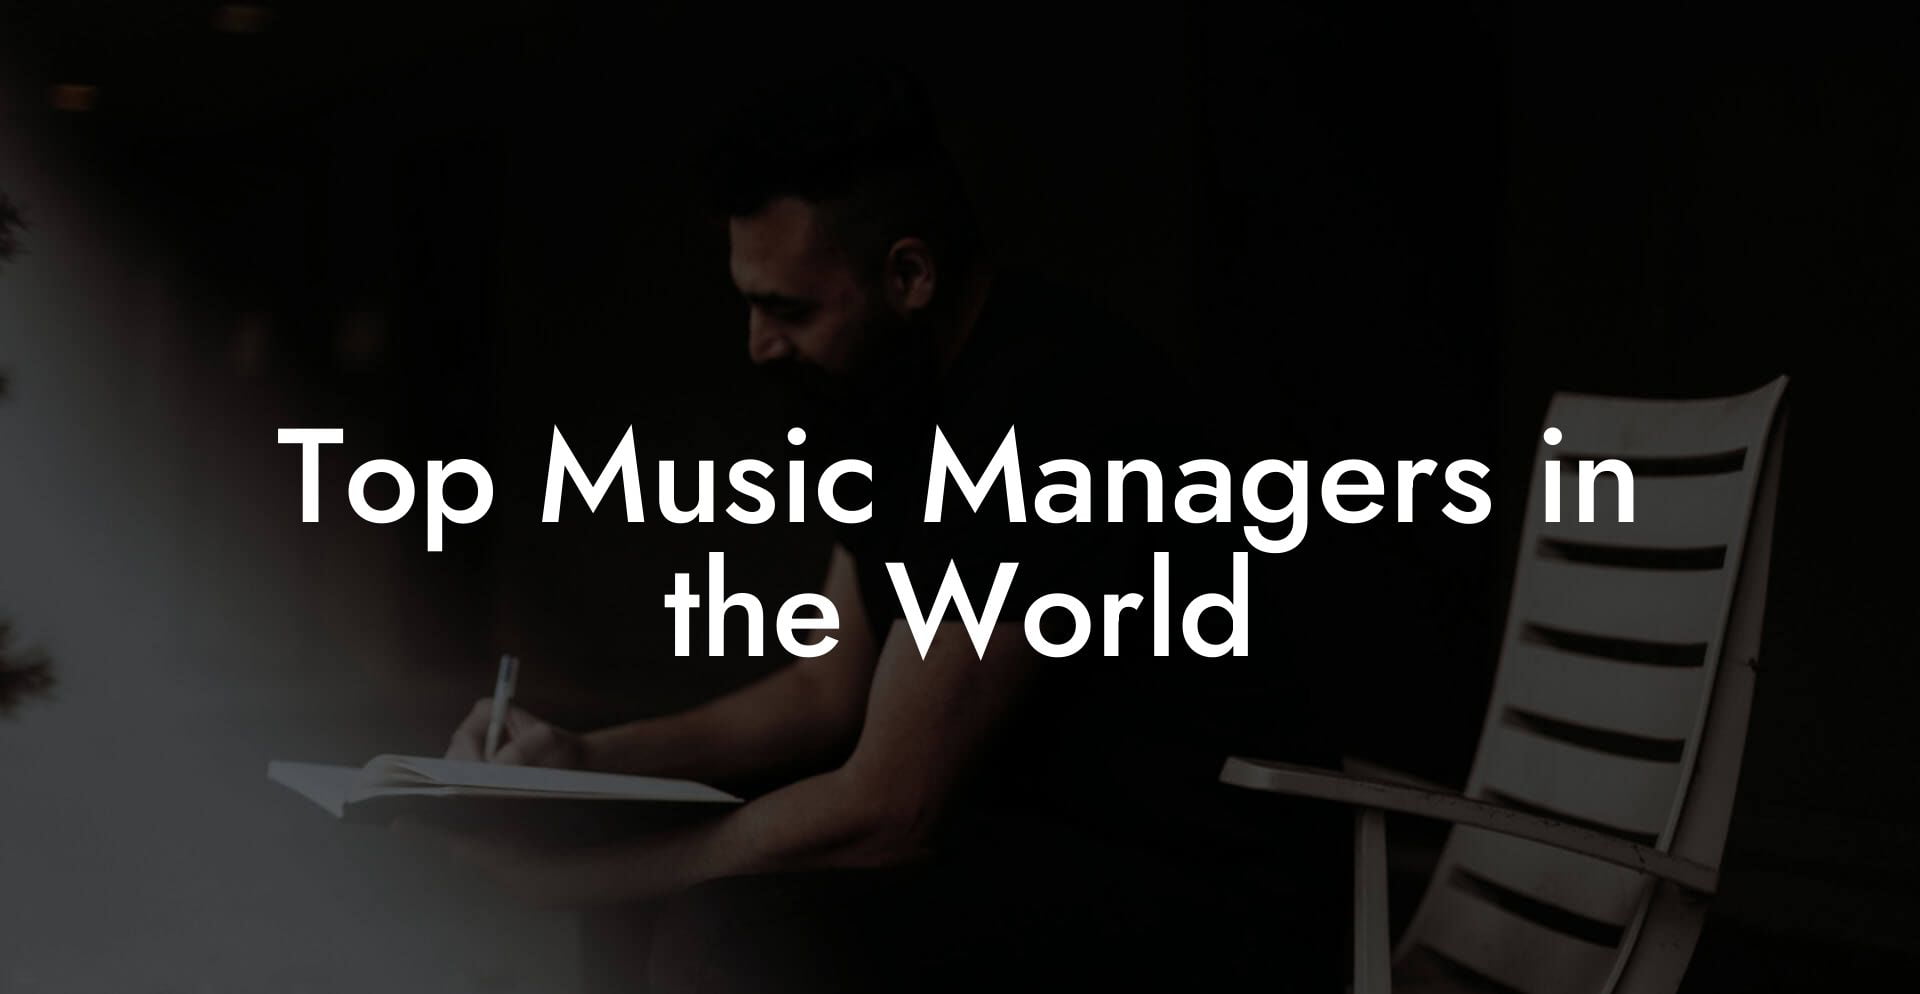 Top Music Managers in the World